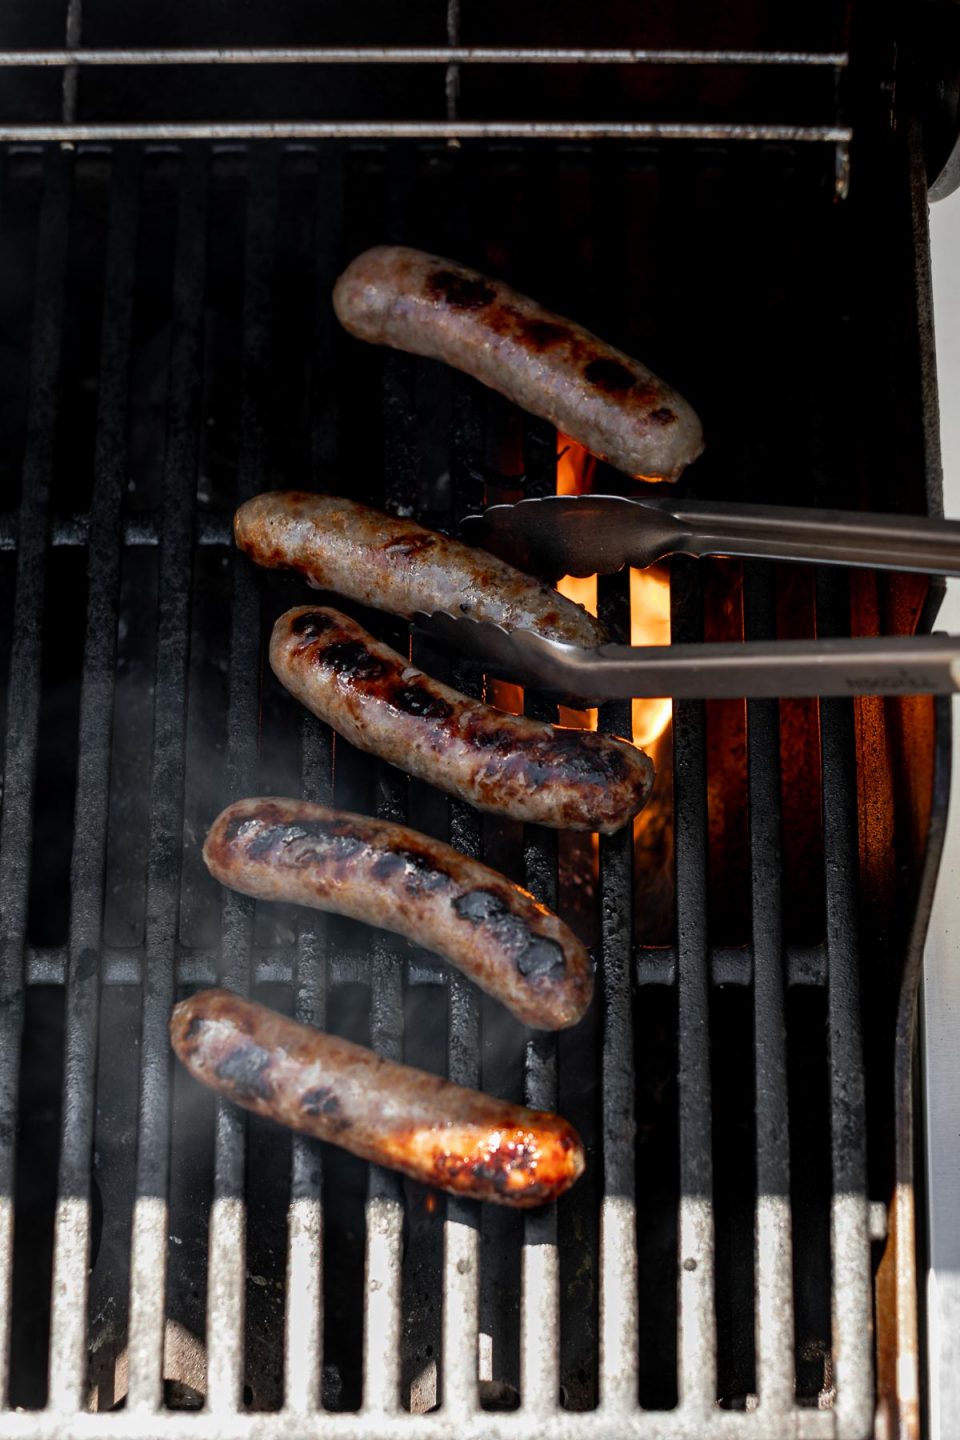 Grilled beer brats over direct heat, charring on grill grates. Grilling tongs peek into the frame, flipping one of the brats.